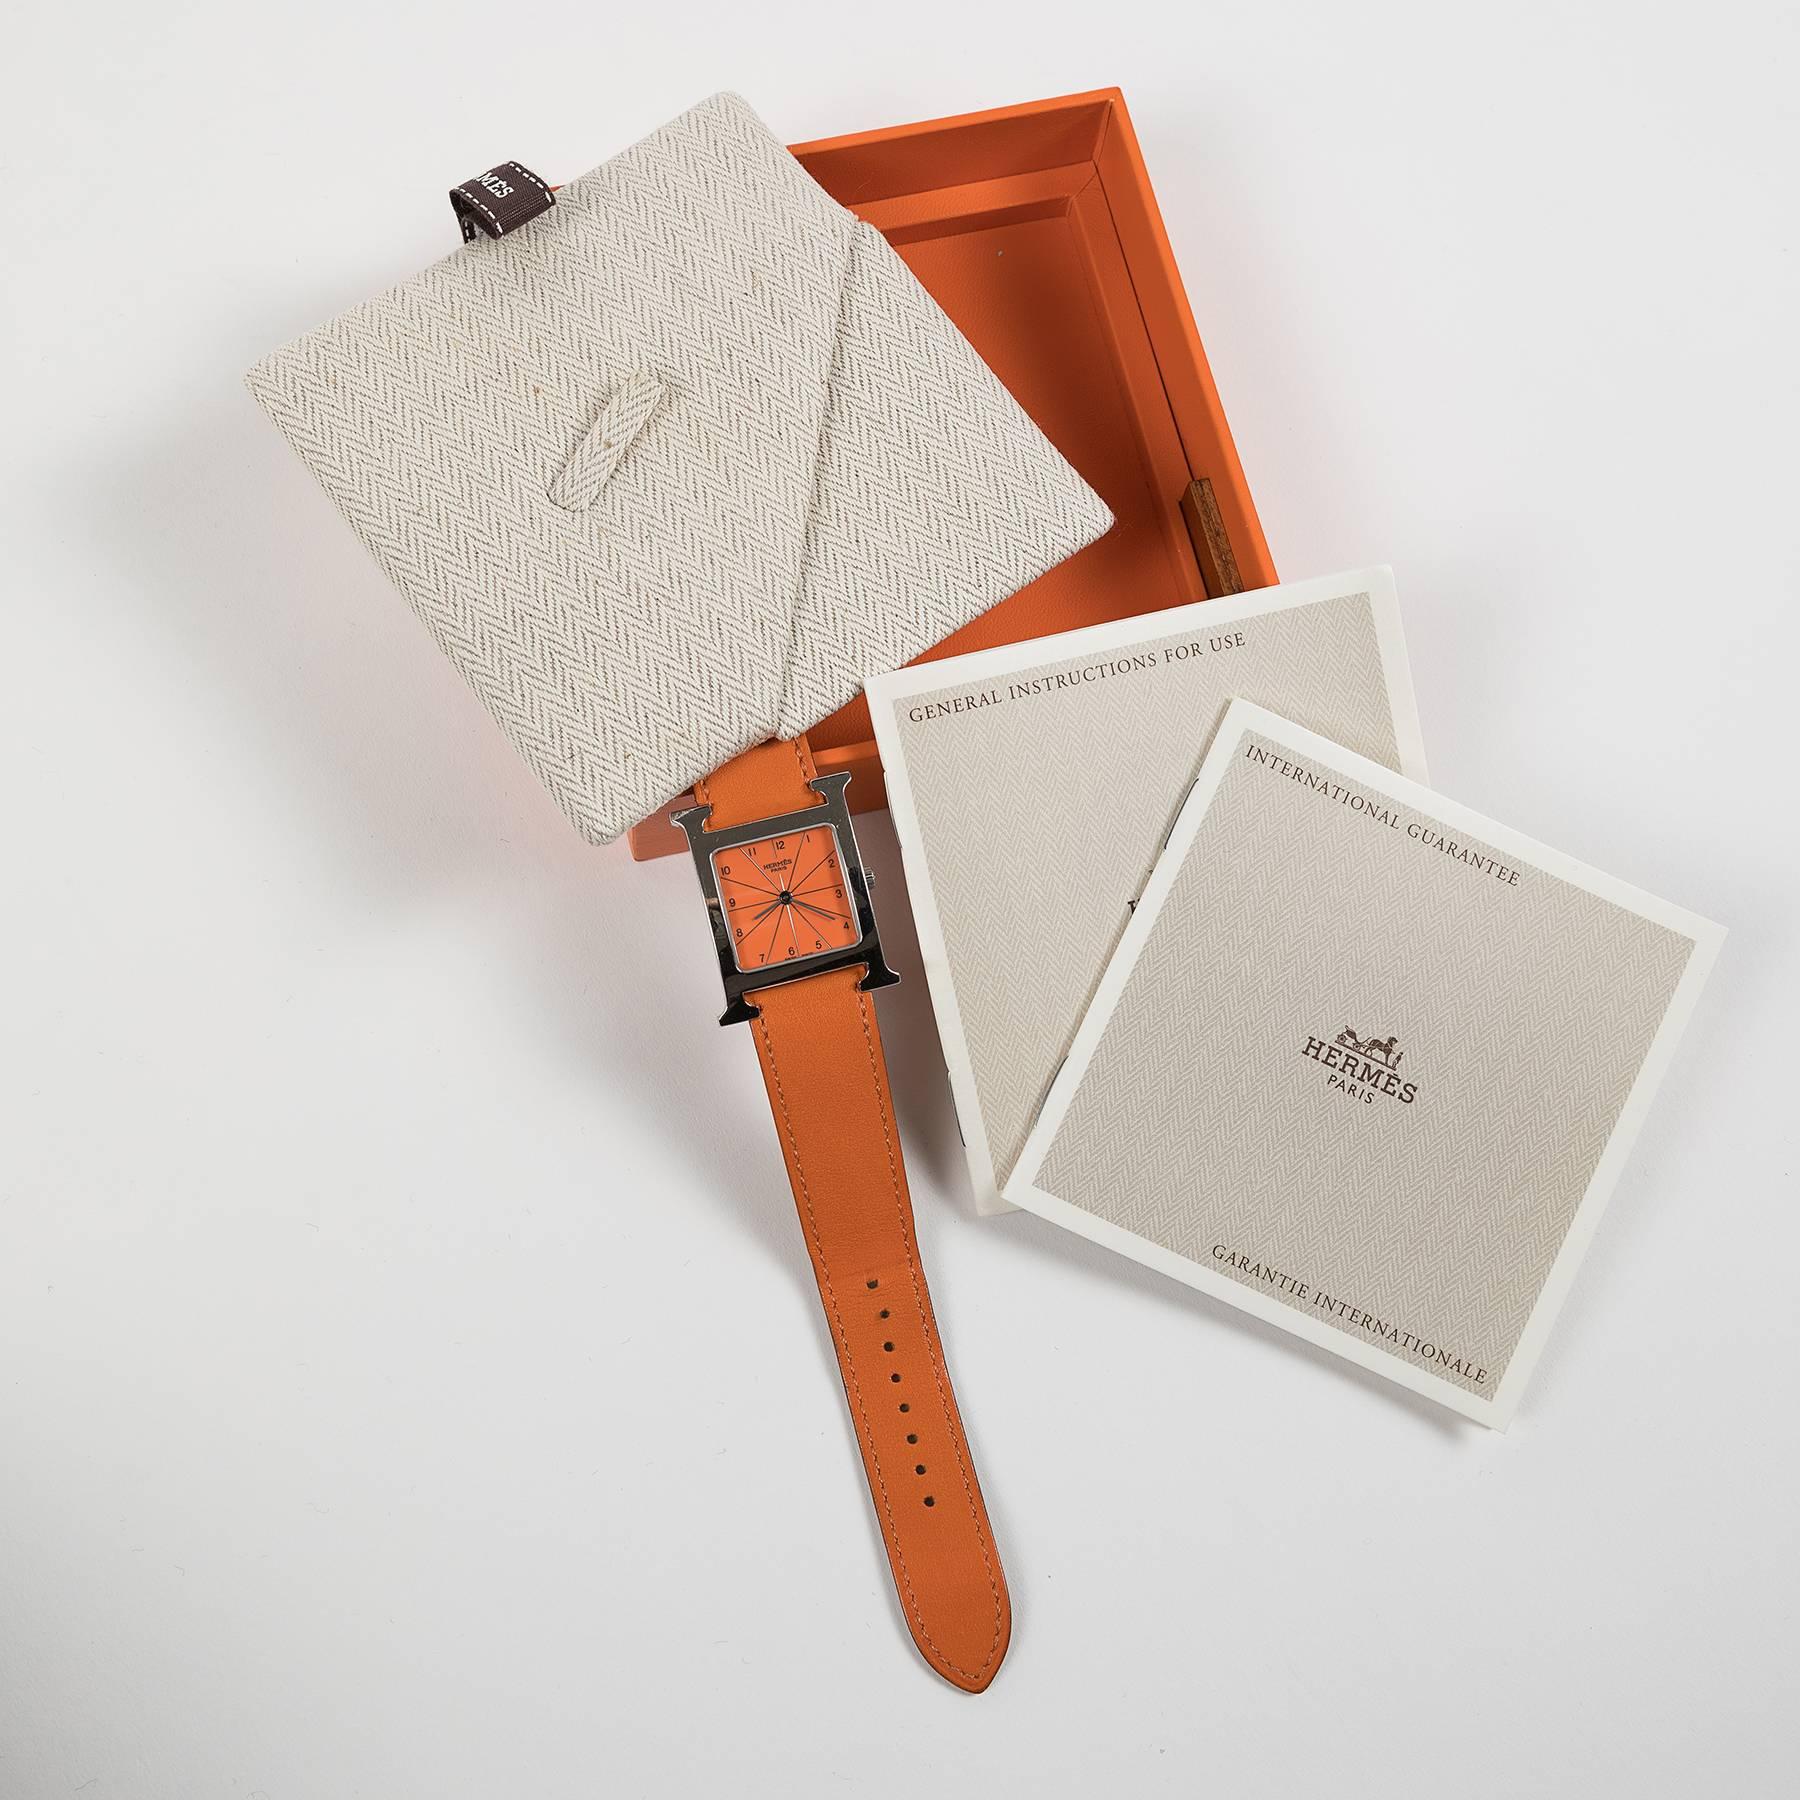 2002 Hermes Heure H Wrist Watch Silver Colour and Orange Leather Wristband  4